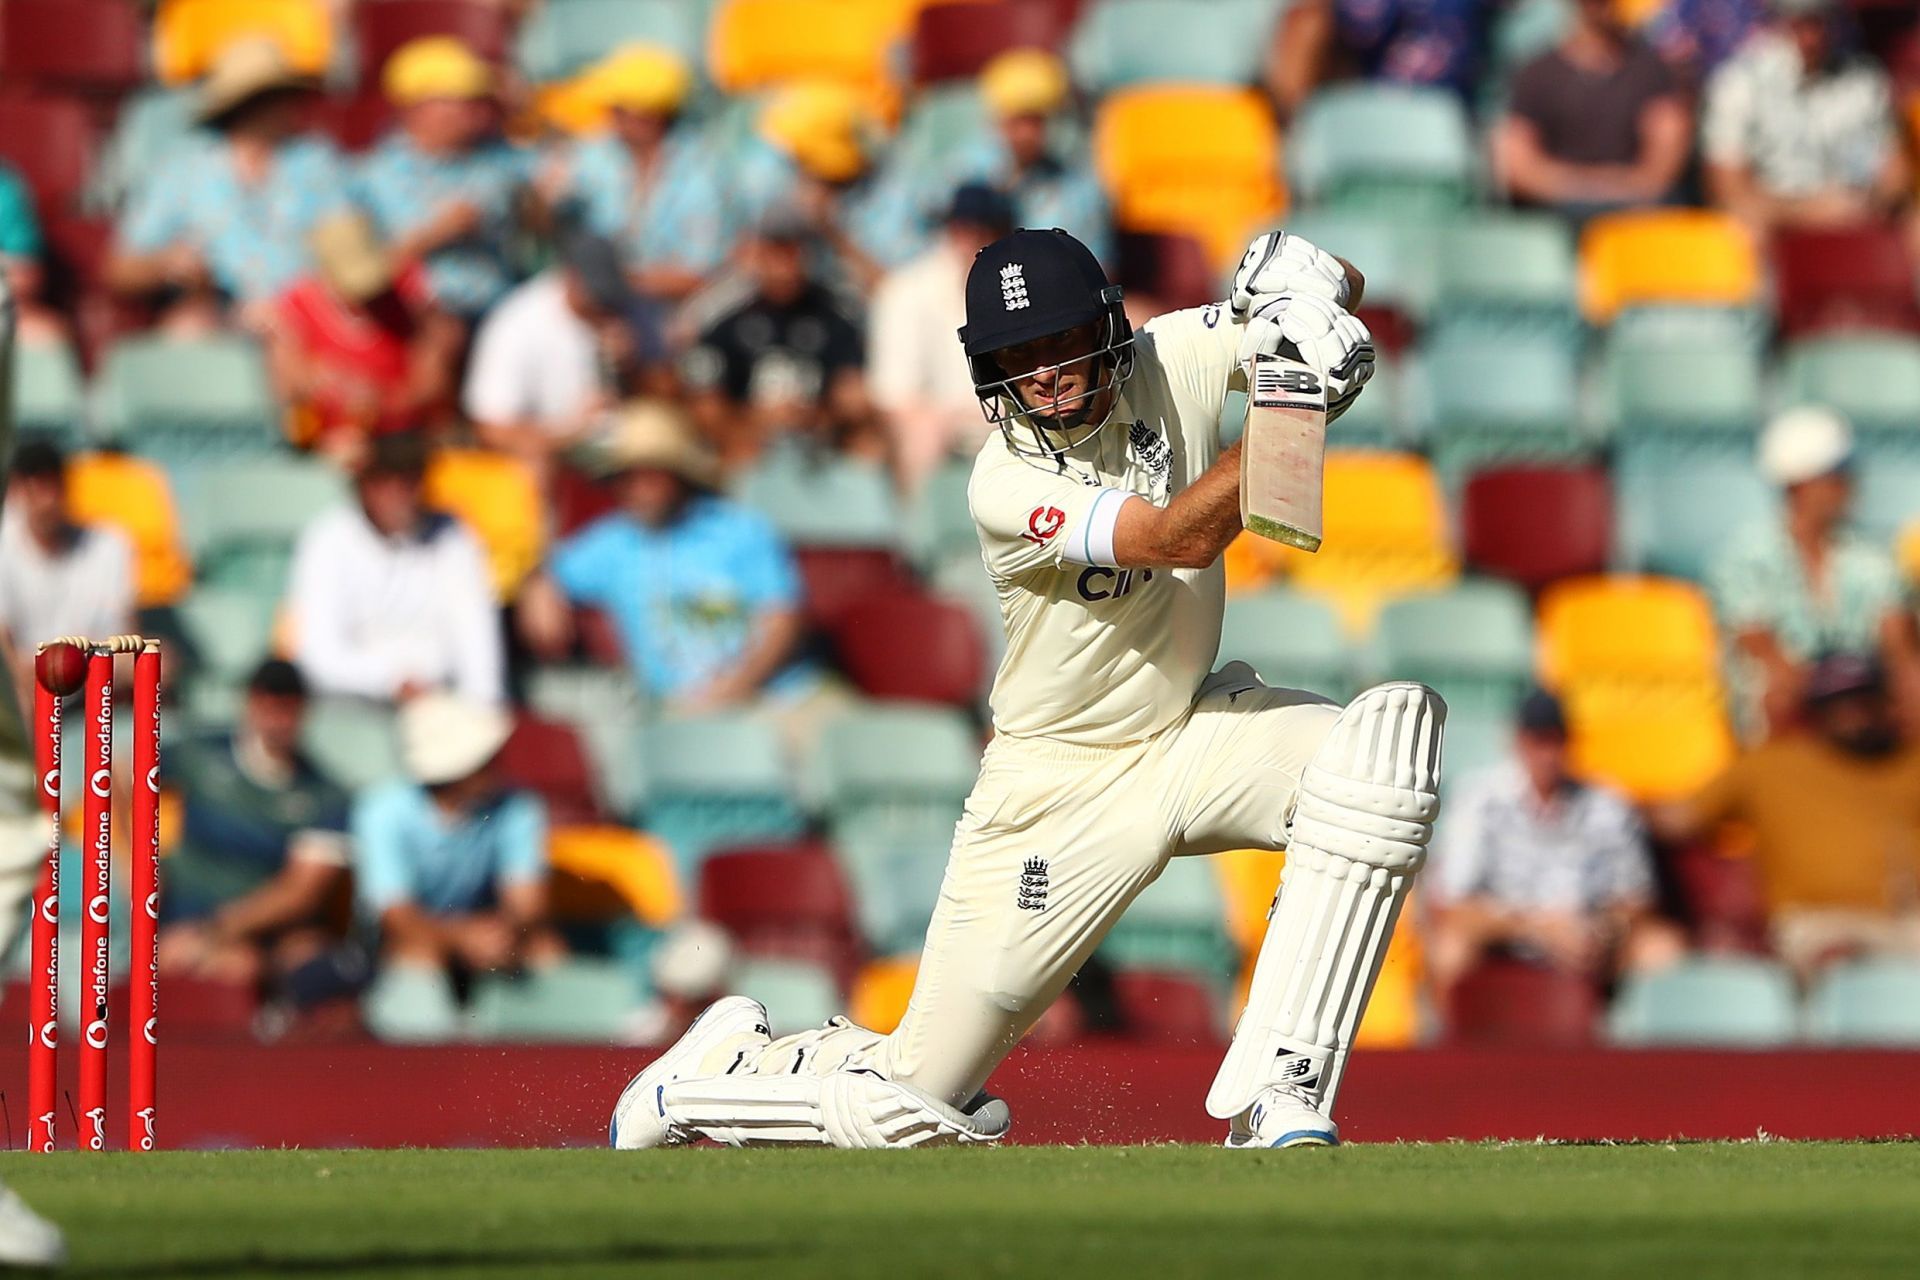 Joe Root during his knock on Day 3 of the 1st Ashes Test. Pic: Getty Images